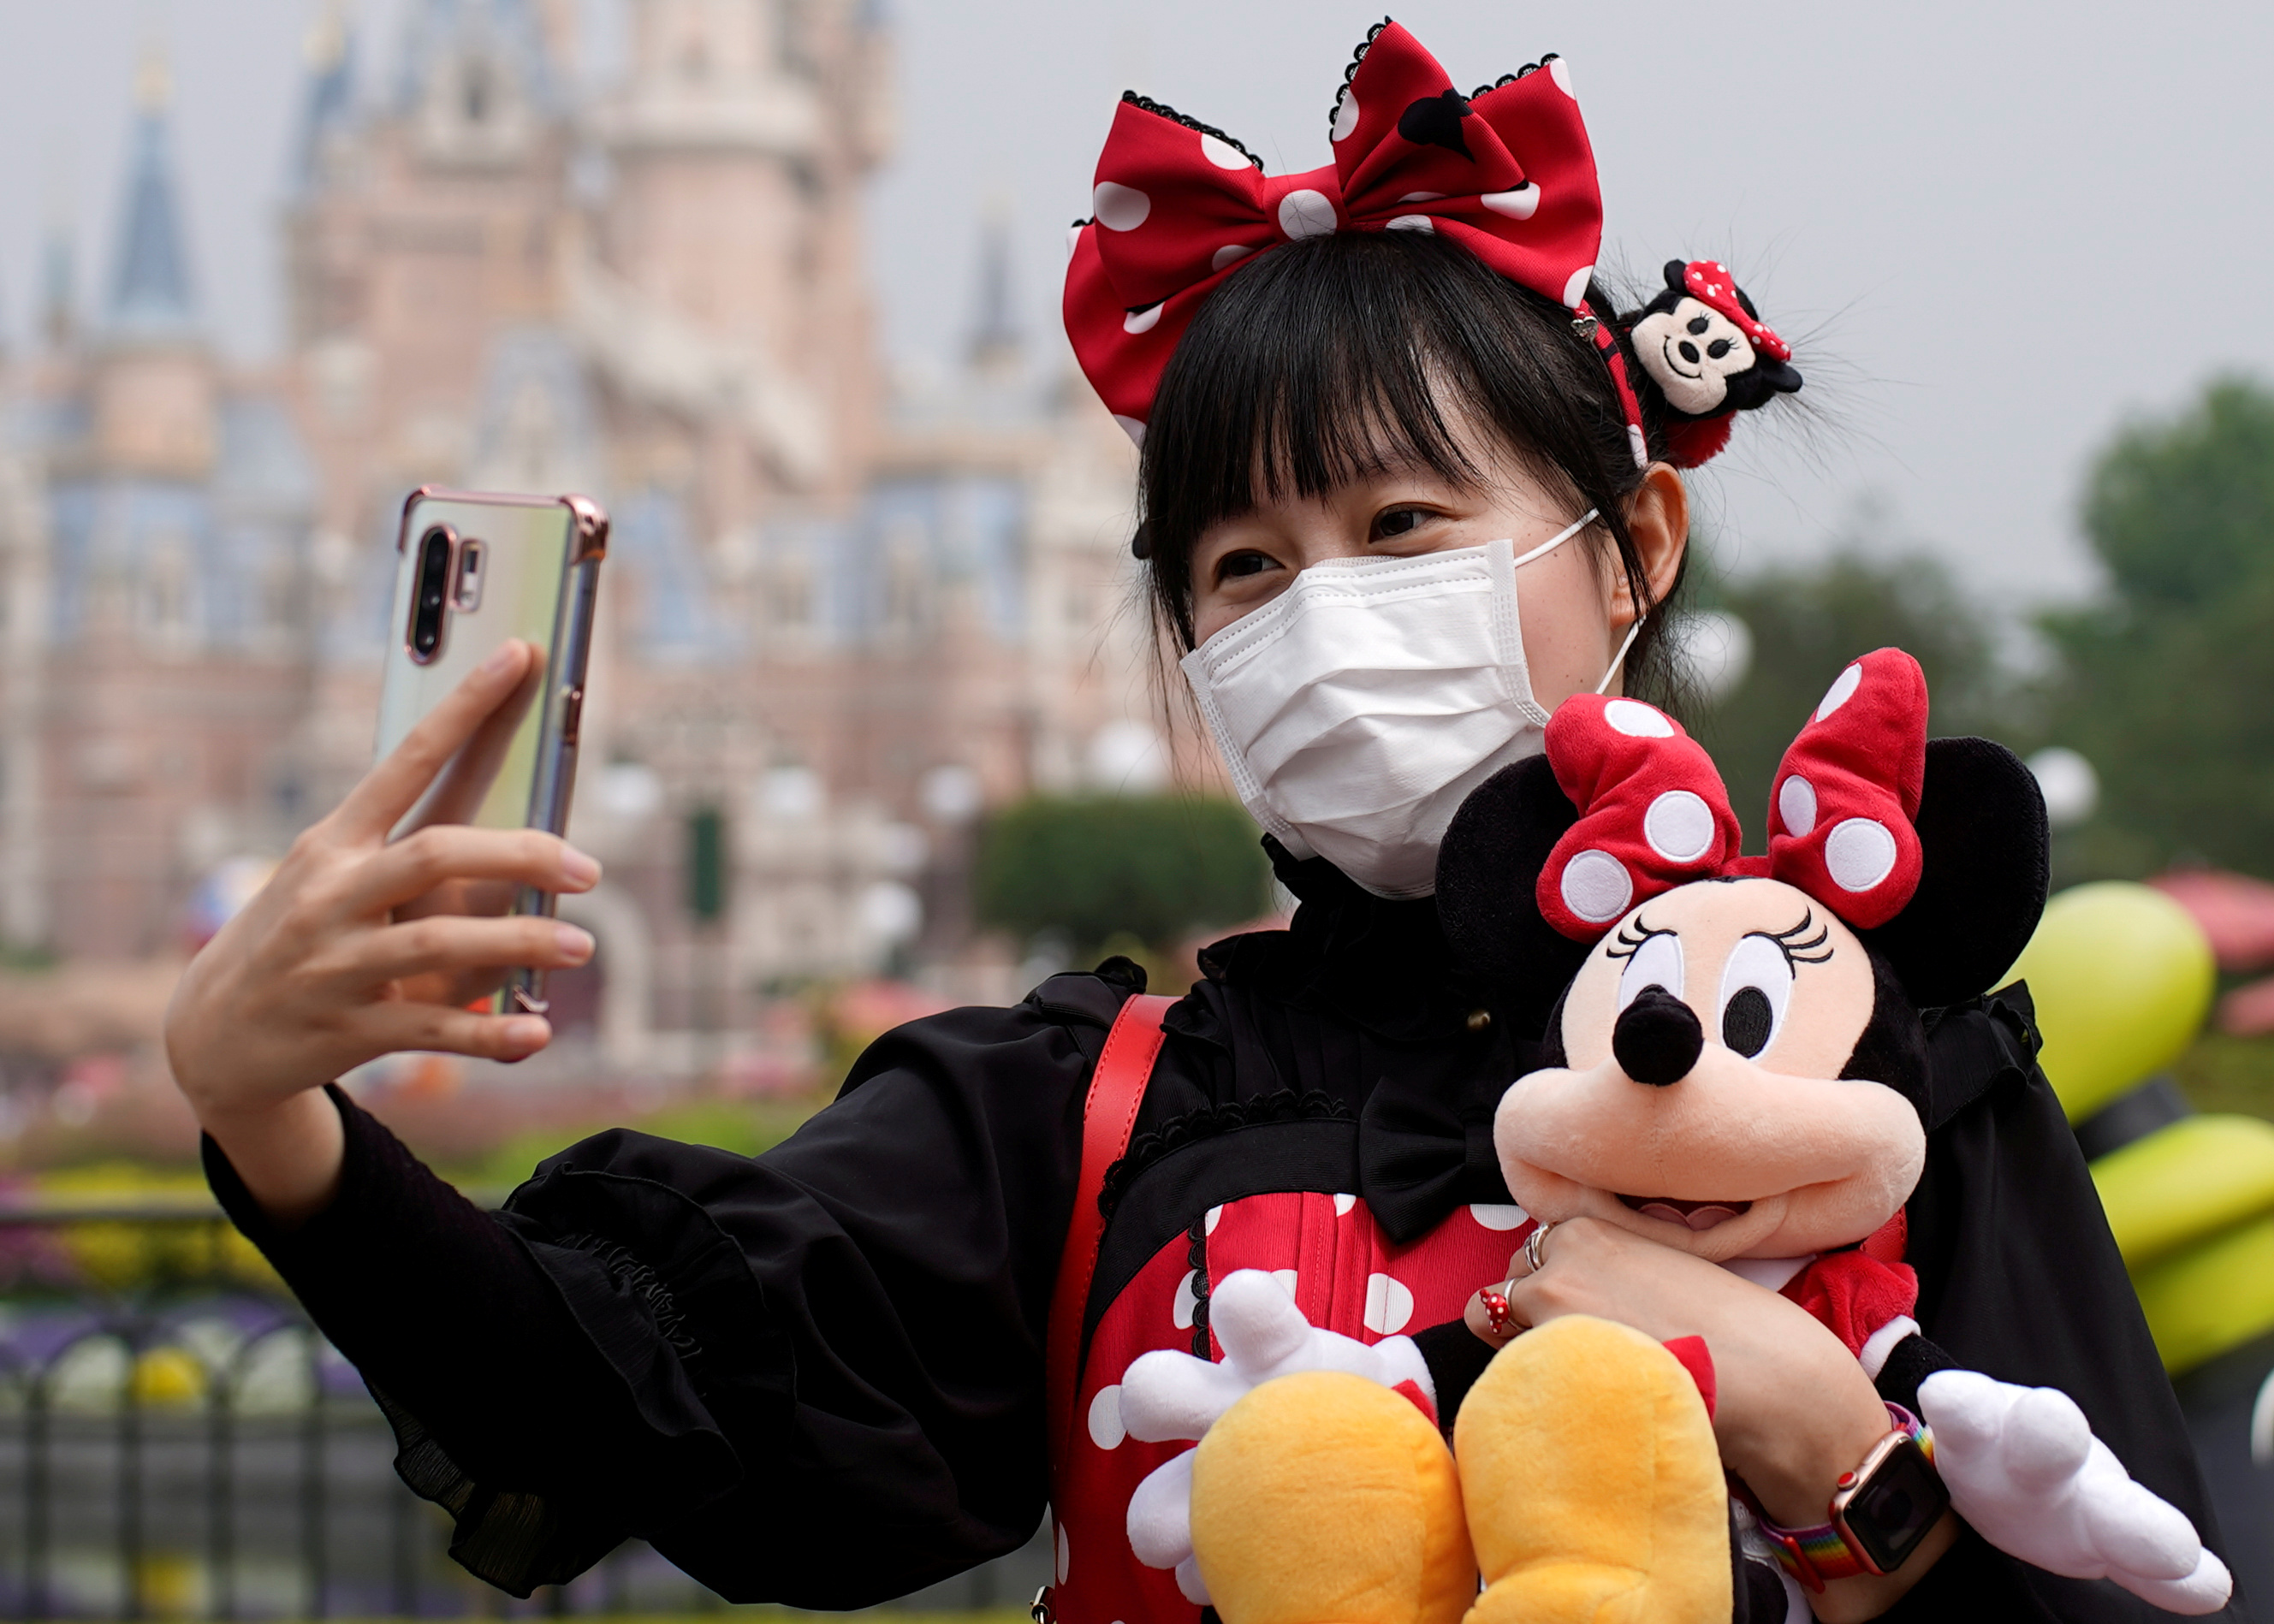 A visitor dressed as a Disney character takes a selfie while wearing a protective face mask at Shanghai Disney Resort as the Shanghai Disneyland theme park reopens following a shutdown due to the coronavirus disease (COVID-19) outbreak, in Shan